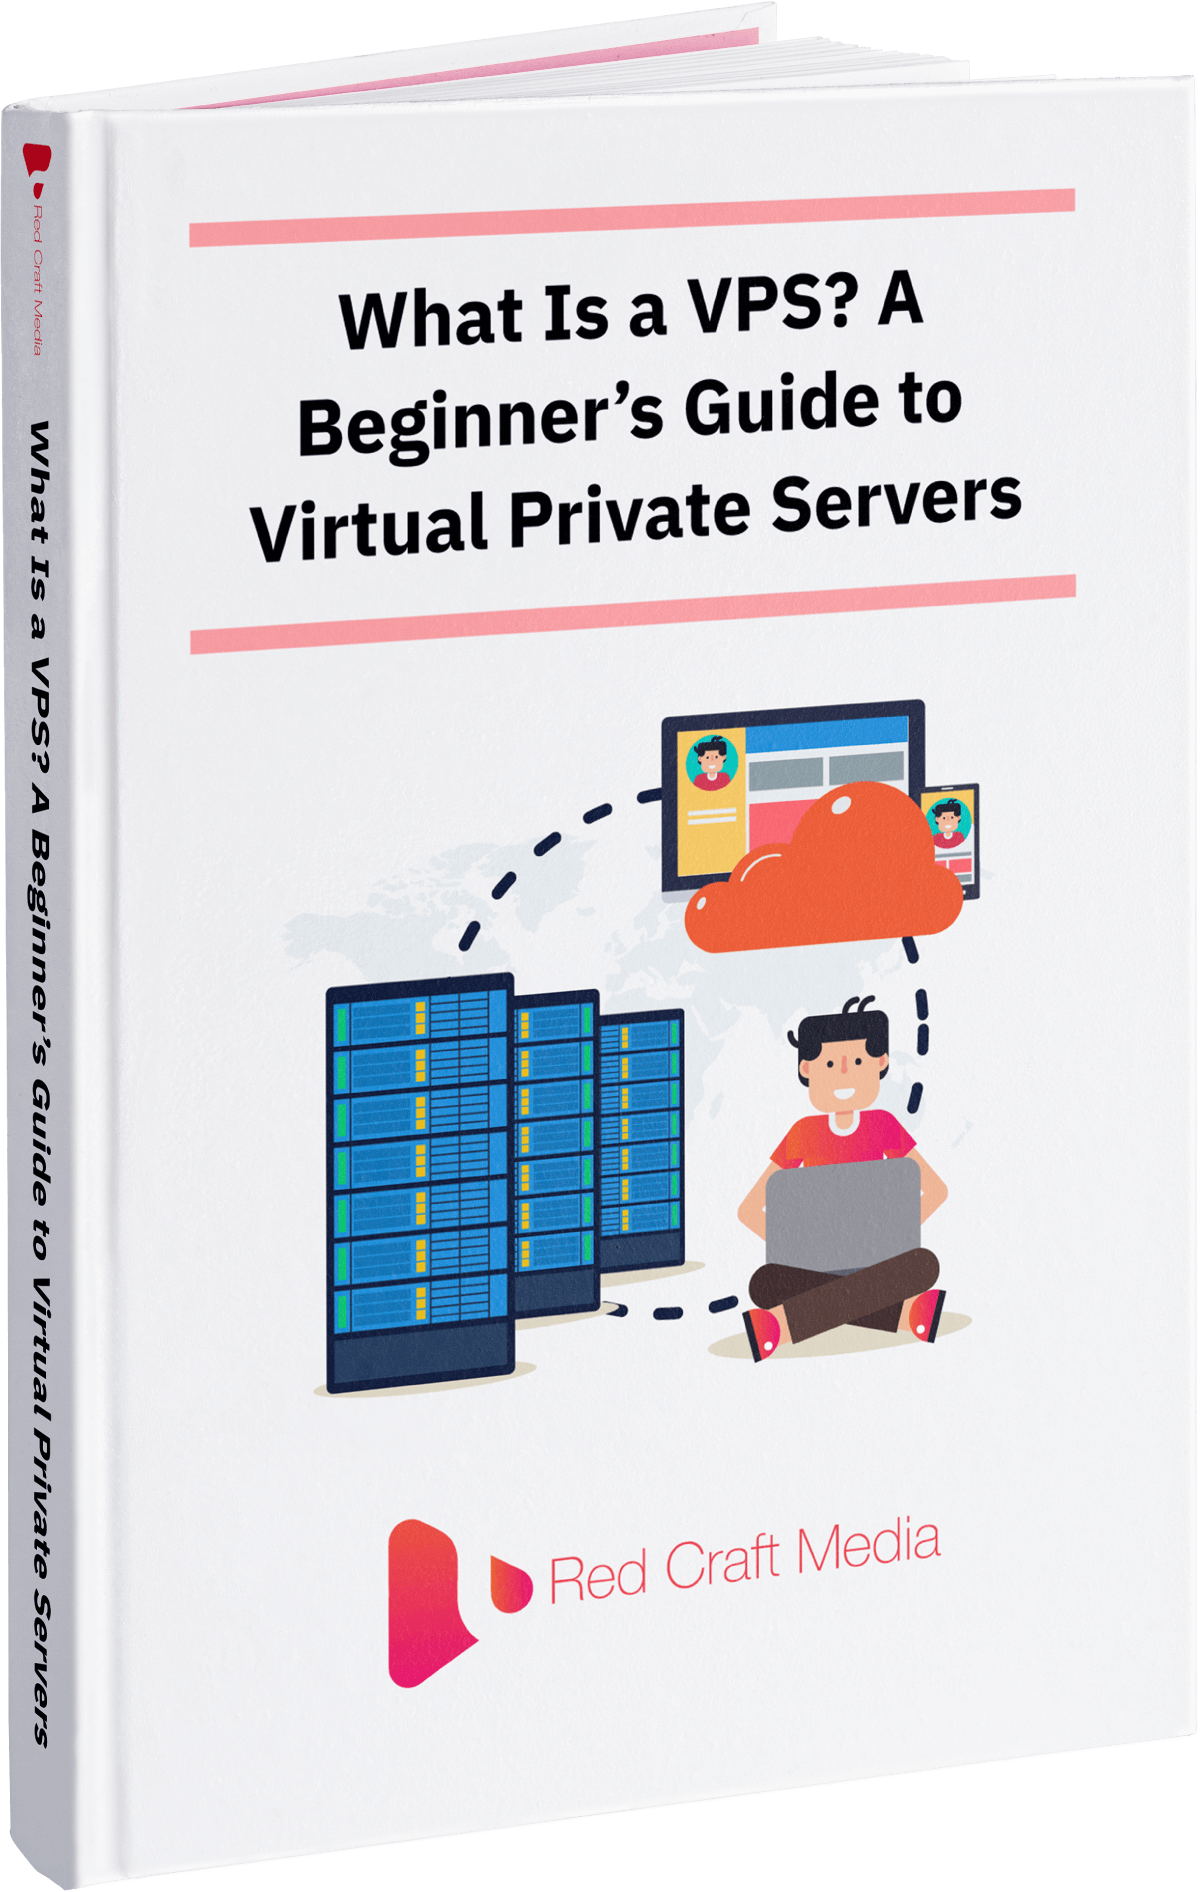 What-Is-a-VPS-A-Beginner’s-Guide-to-Virtual-Private